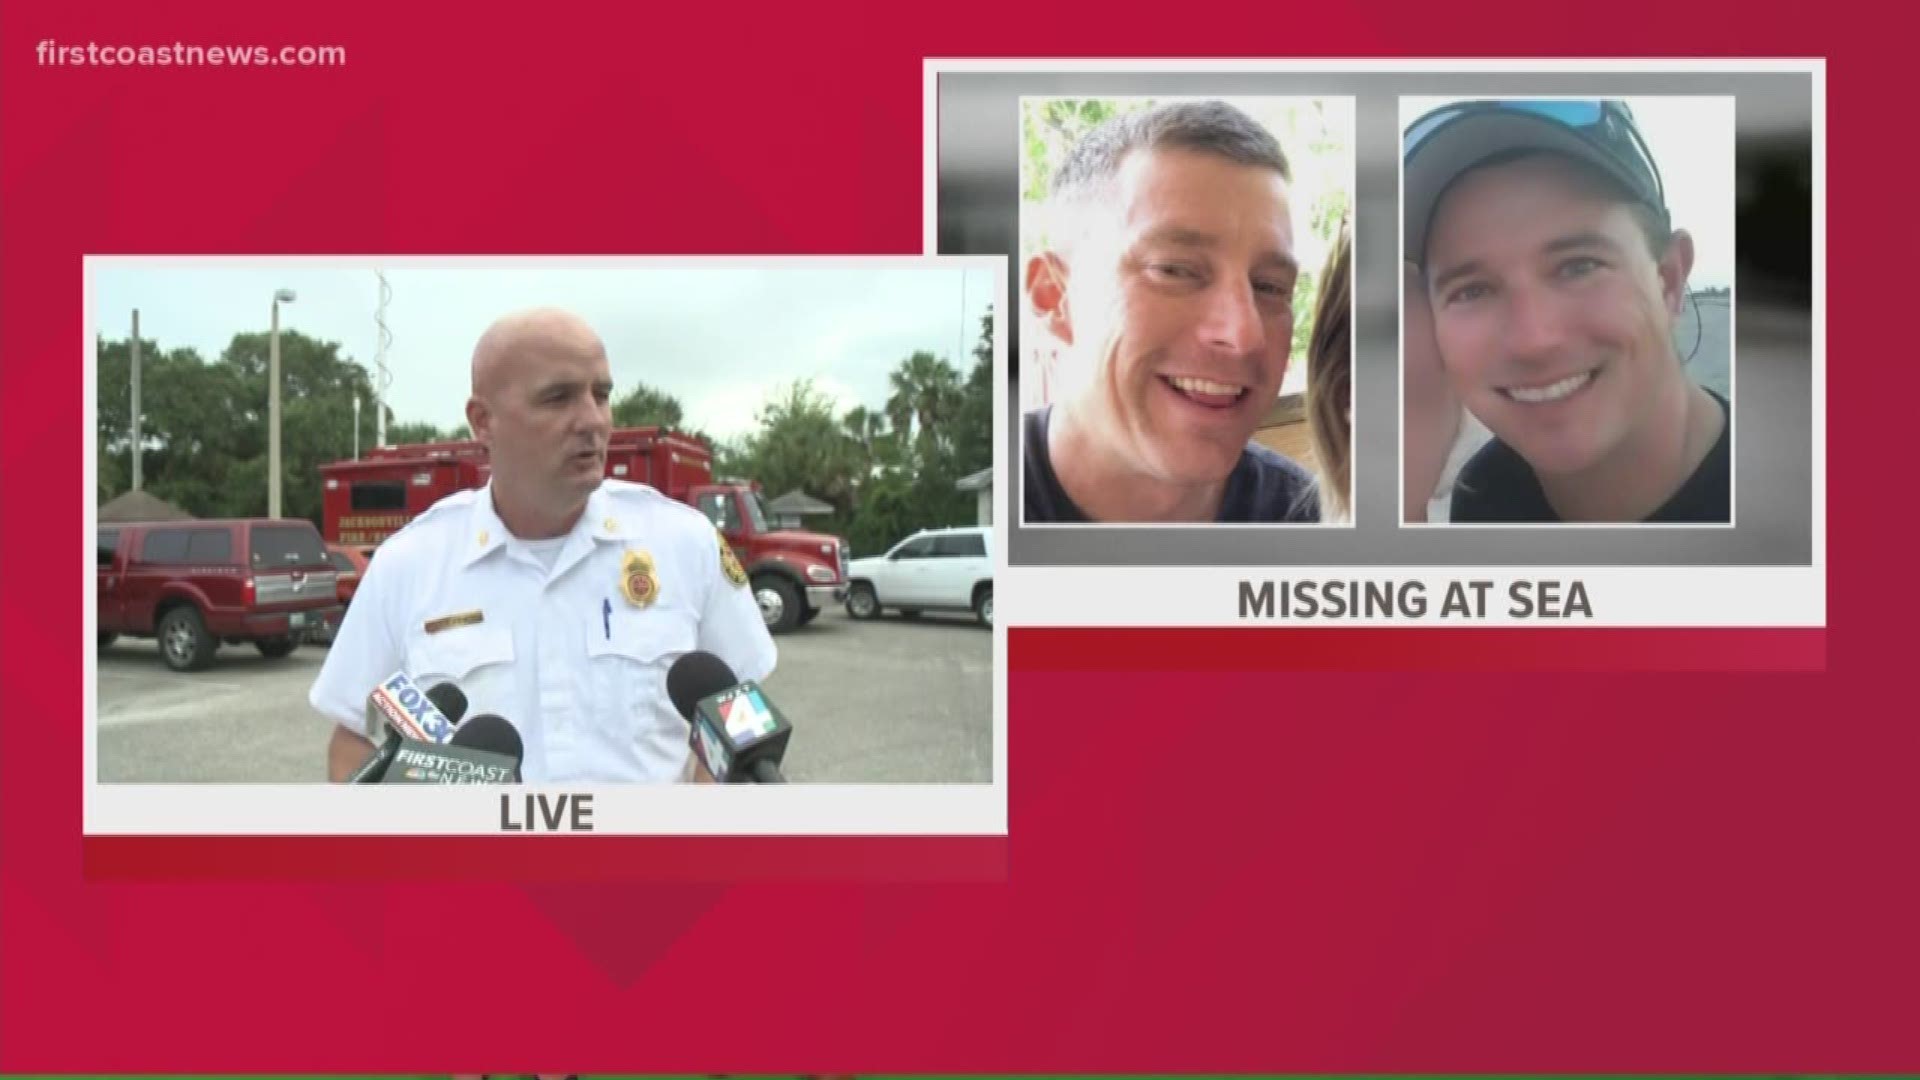 The Jacksonville Fire and Rescue Department said search efforts for two missing firefighters will focus on an area 50 miles off the shore of St. Augustine where a tackle bag belonging to one of the firefighters was found.